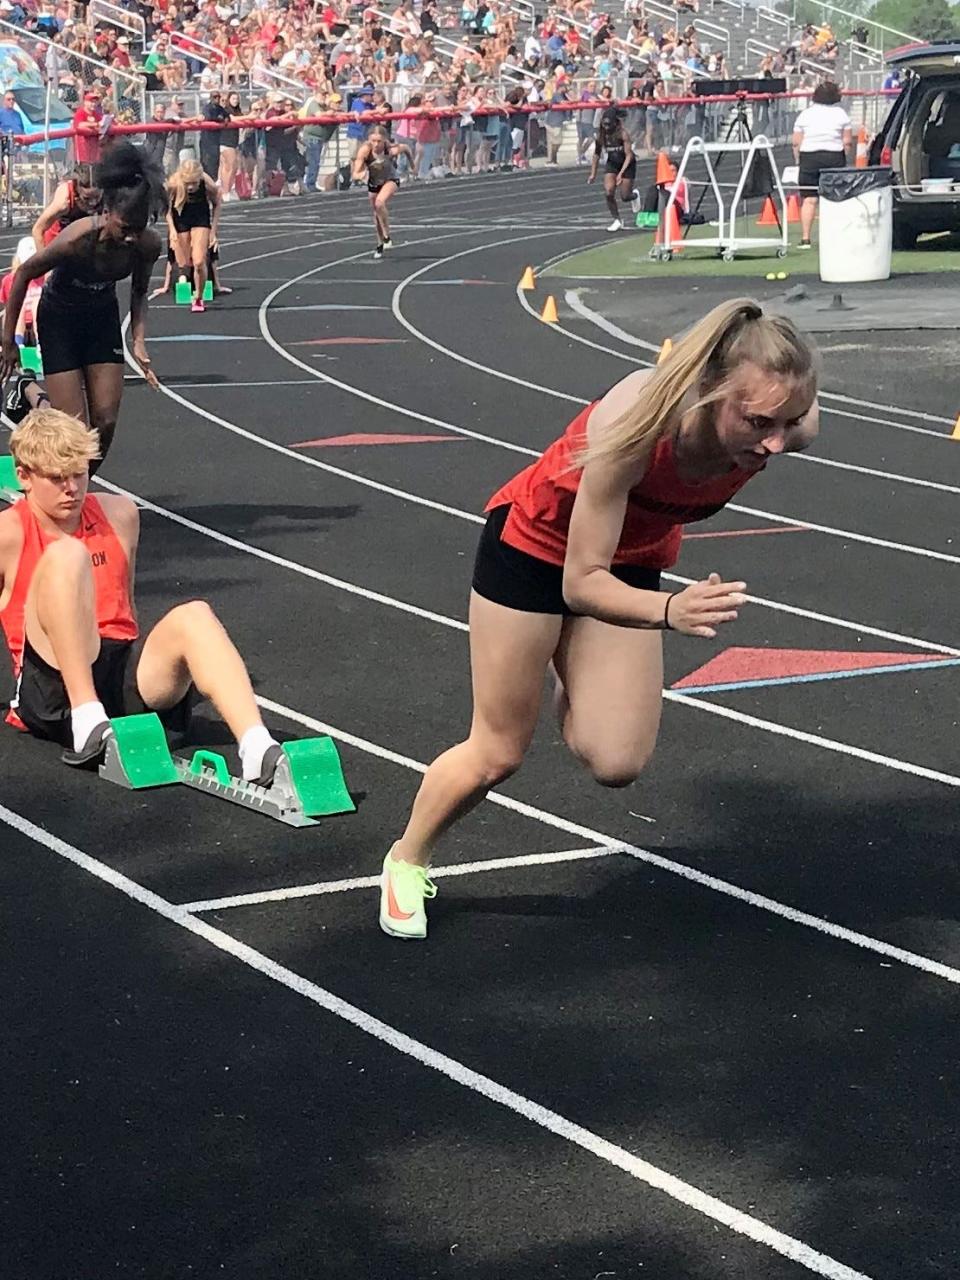 North Union's Hannah Carney fires out of the blocks for a girls 400-meter race at the Division II track and field meet at Westerville South last year.